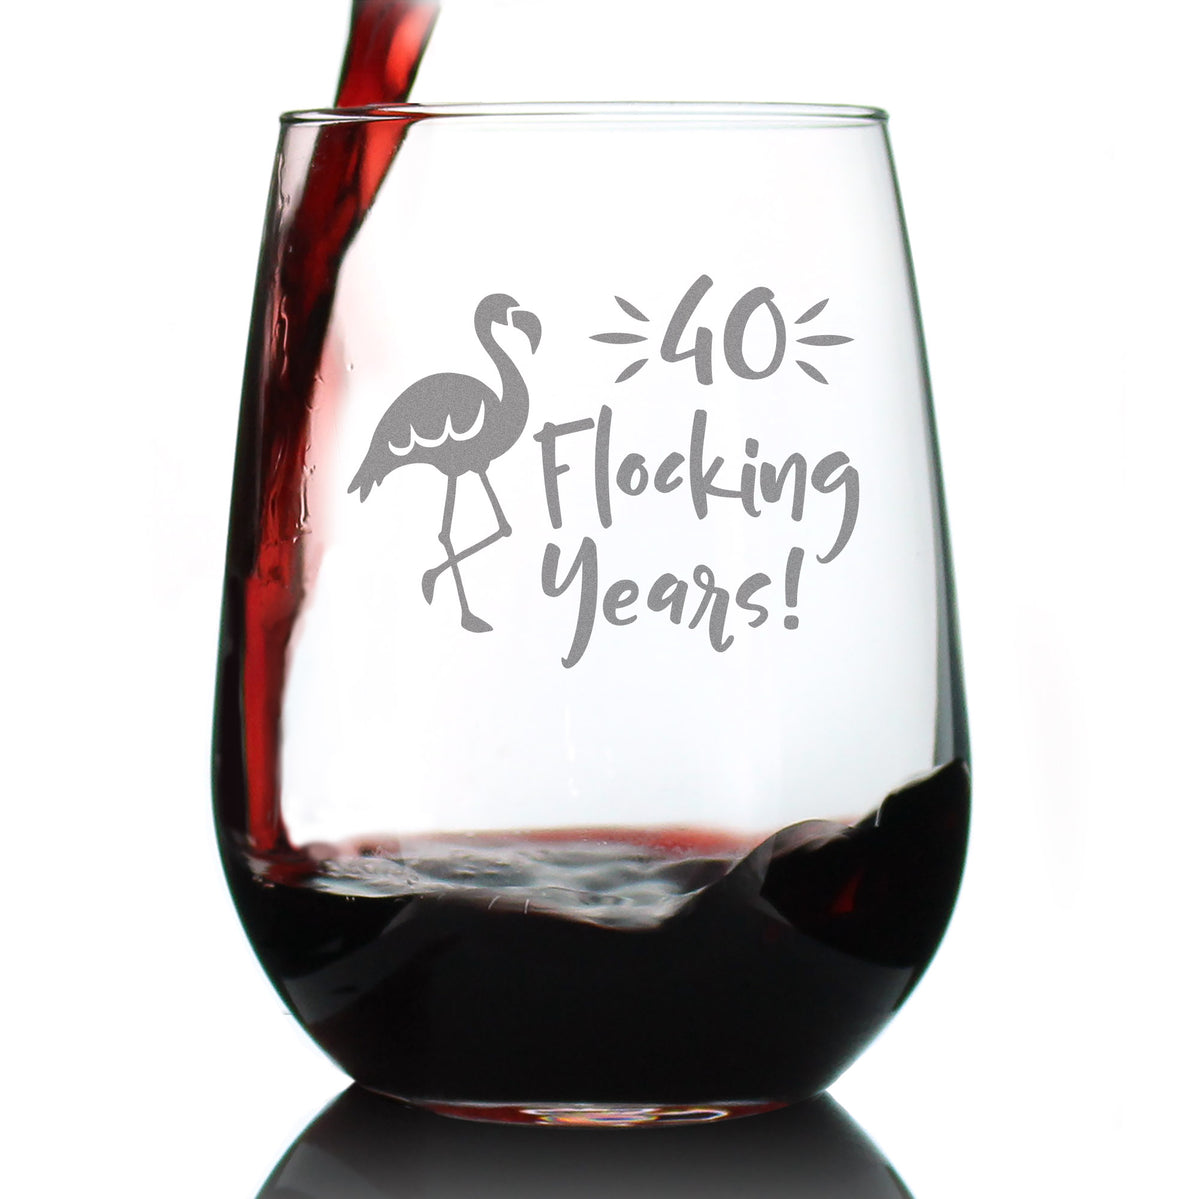 40 Flocking Years - Funny Flamingo Stemless Wine Glass Gift for 40th Birthday, Anniversary or Reunion - Large